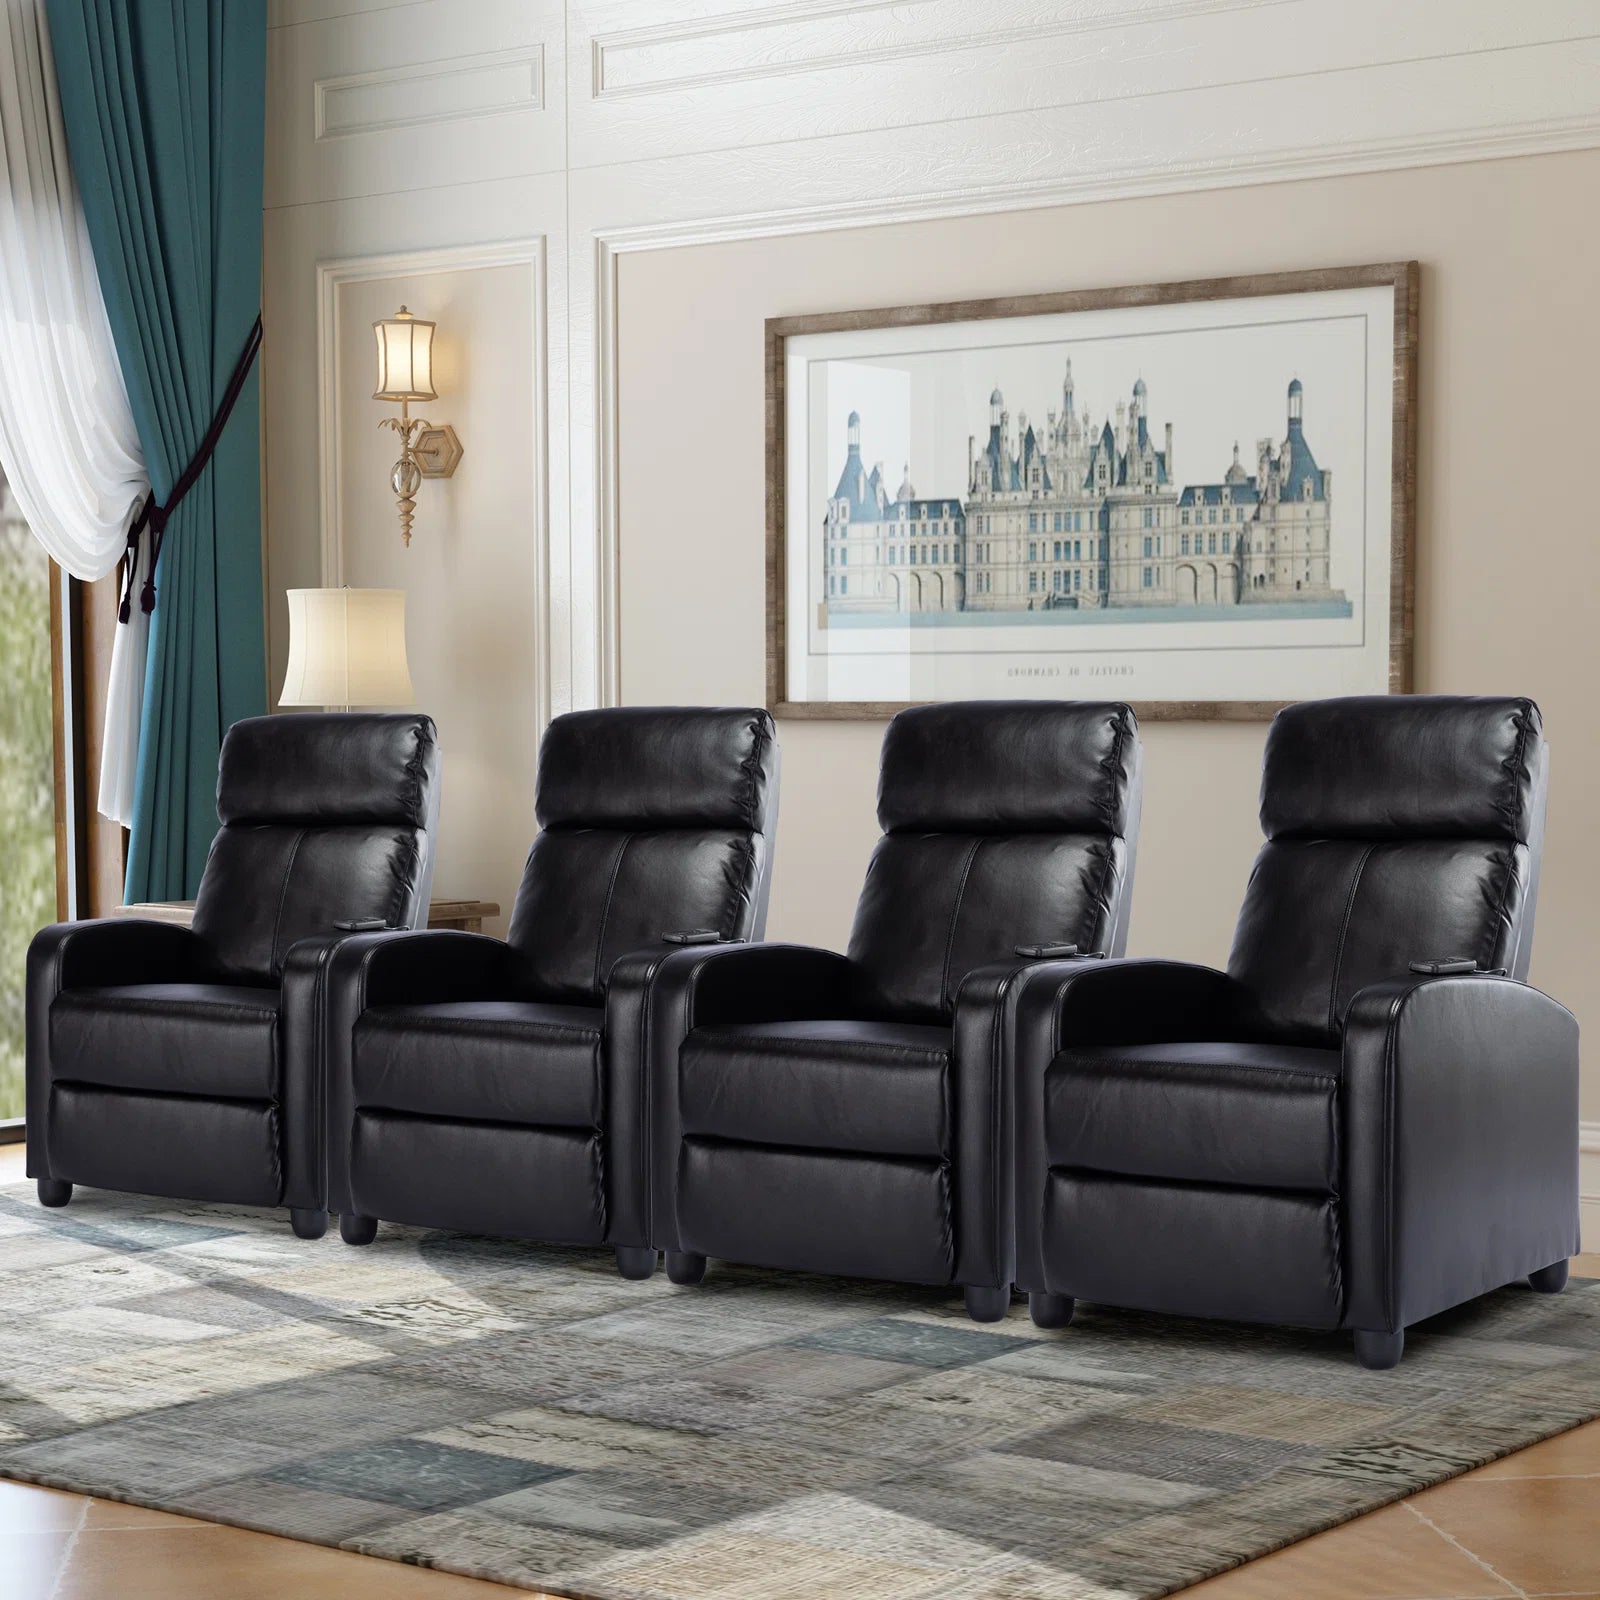 Up To 80% Off Recliners